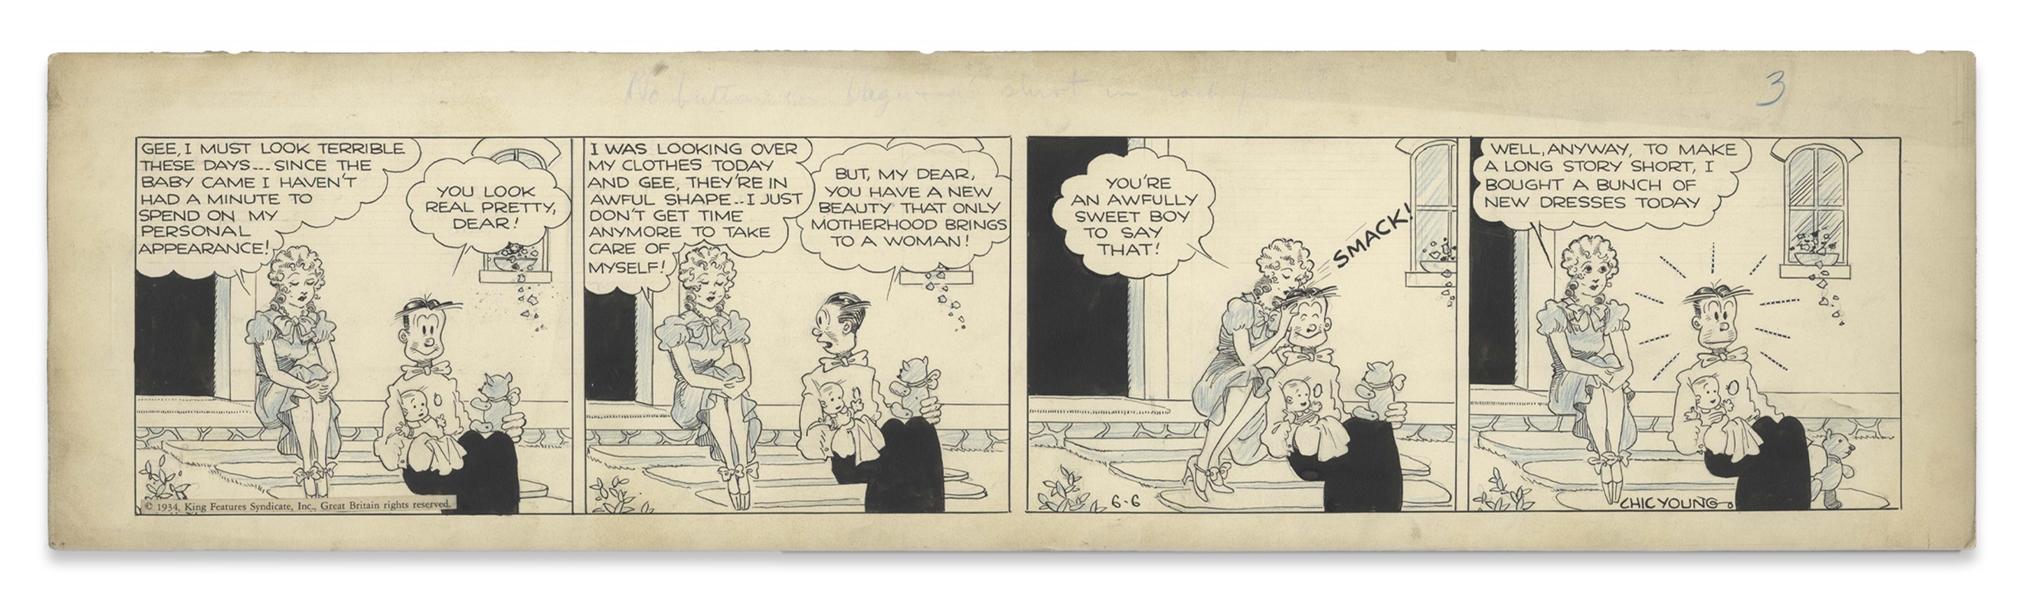 Chic Young Hand-Drawn ''Blondie'' Comic Strip From 1934 Titled ''Dress Rehearsal'' -- Blondie Lifts Her Spirits by Shopping